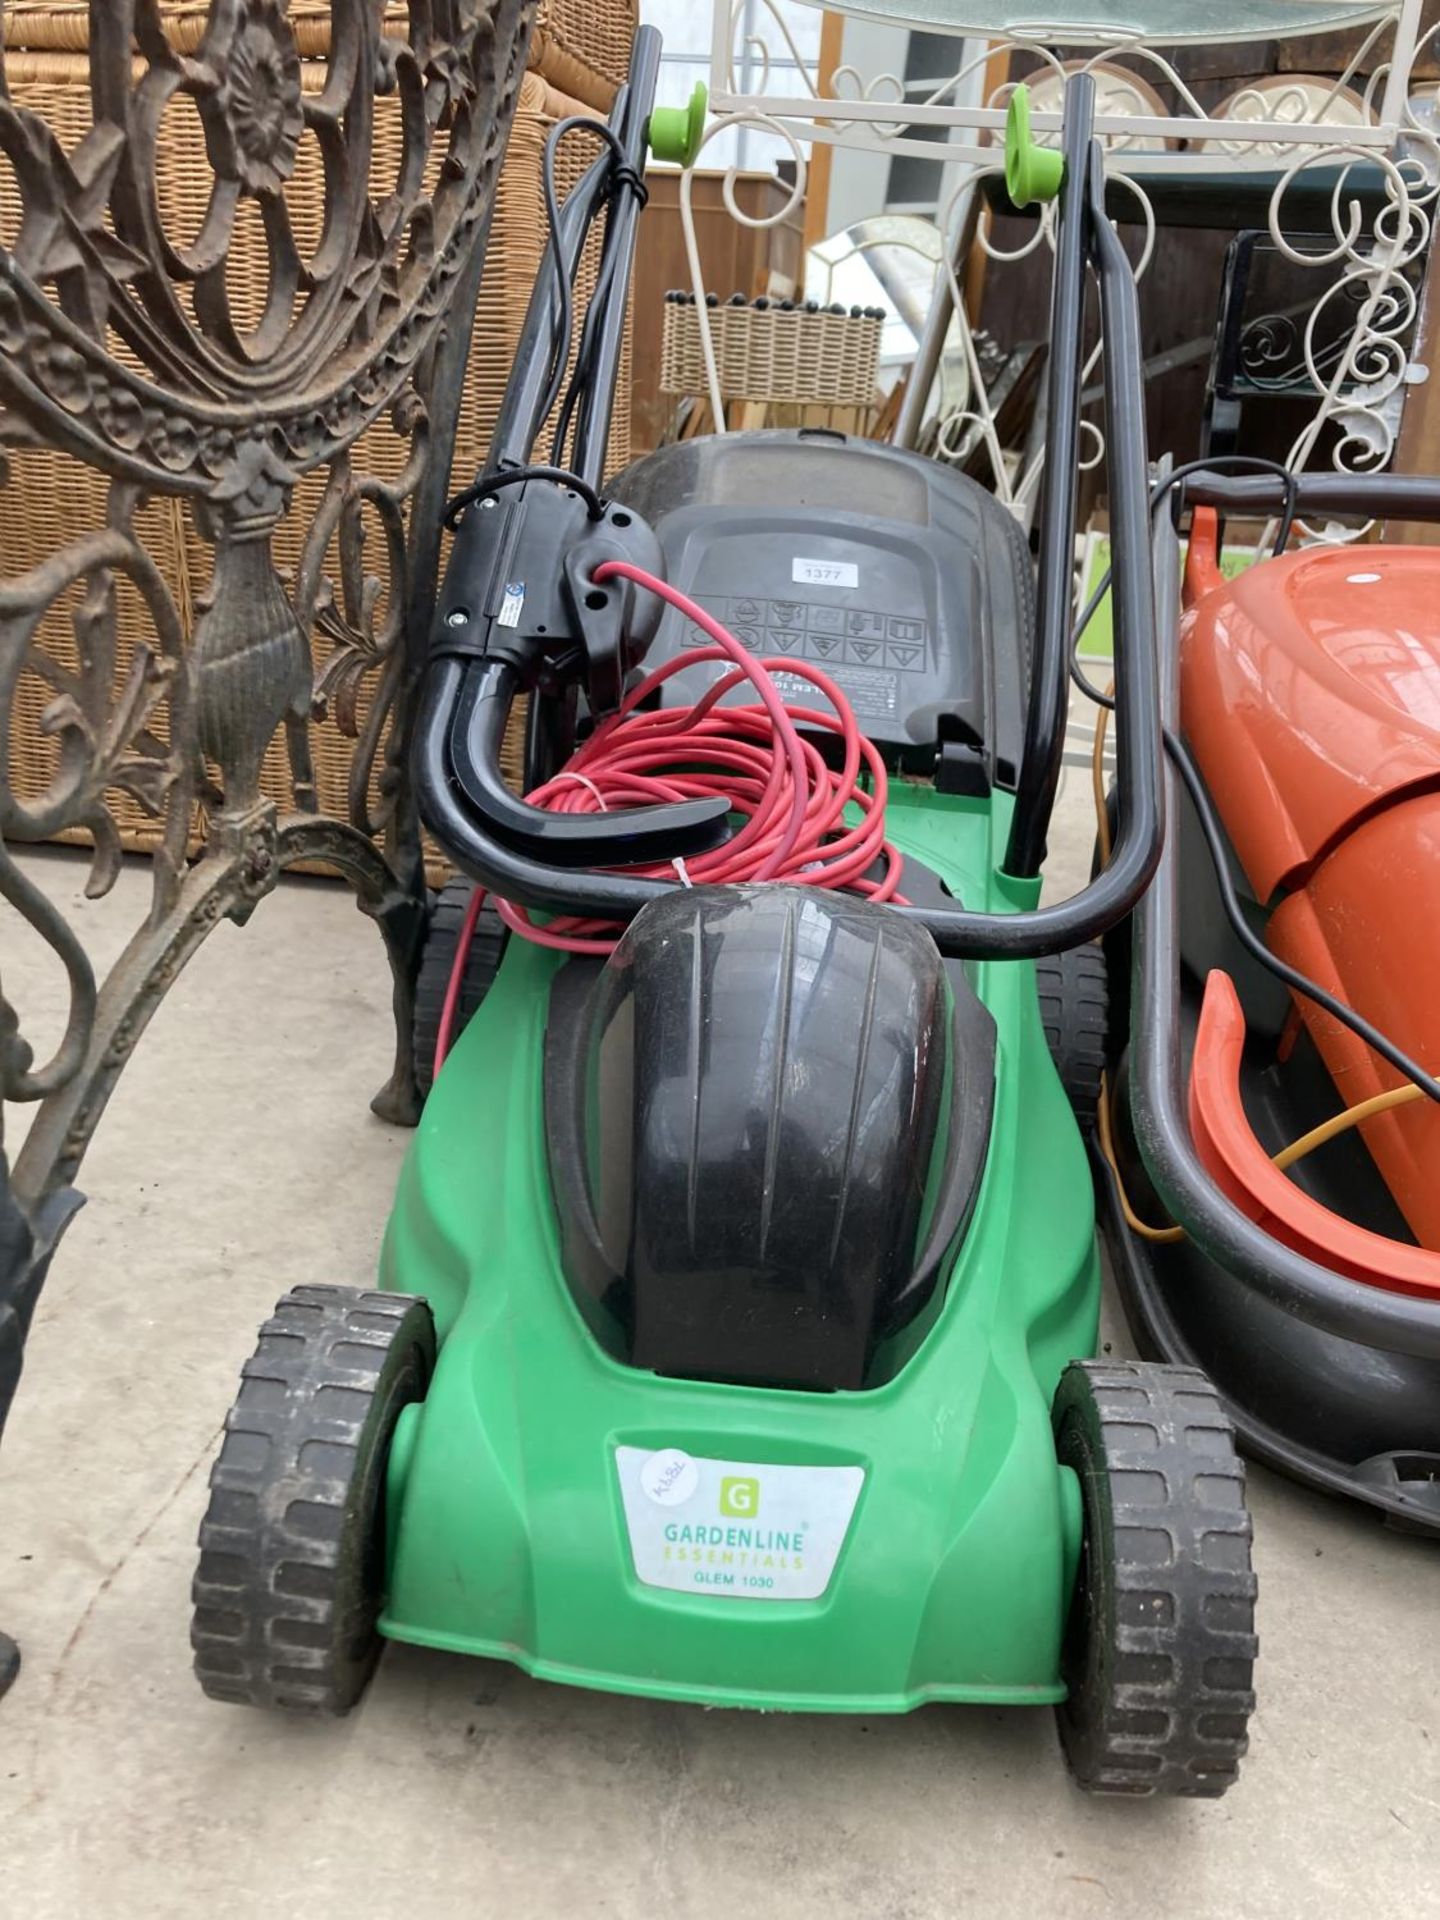 A GARDEN LINE ELECTRIC LAWNMOWER - Image 2 of 2